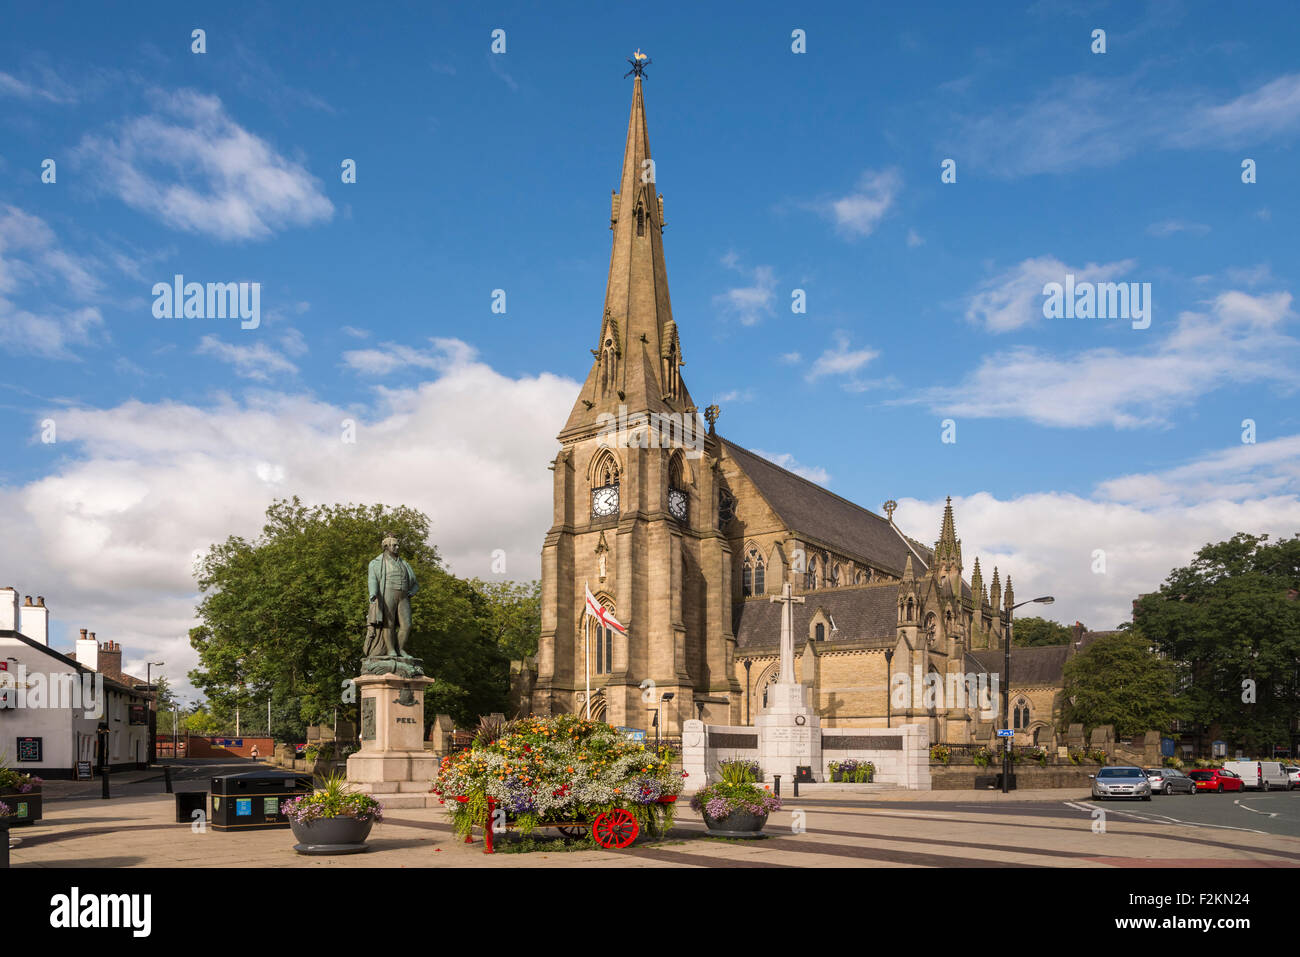 The Parish church of St. Mary the Virgin in Bury Lancashire. North West England. Statue of Prime Minister Robert Peel. Stock Photo